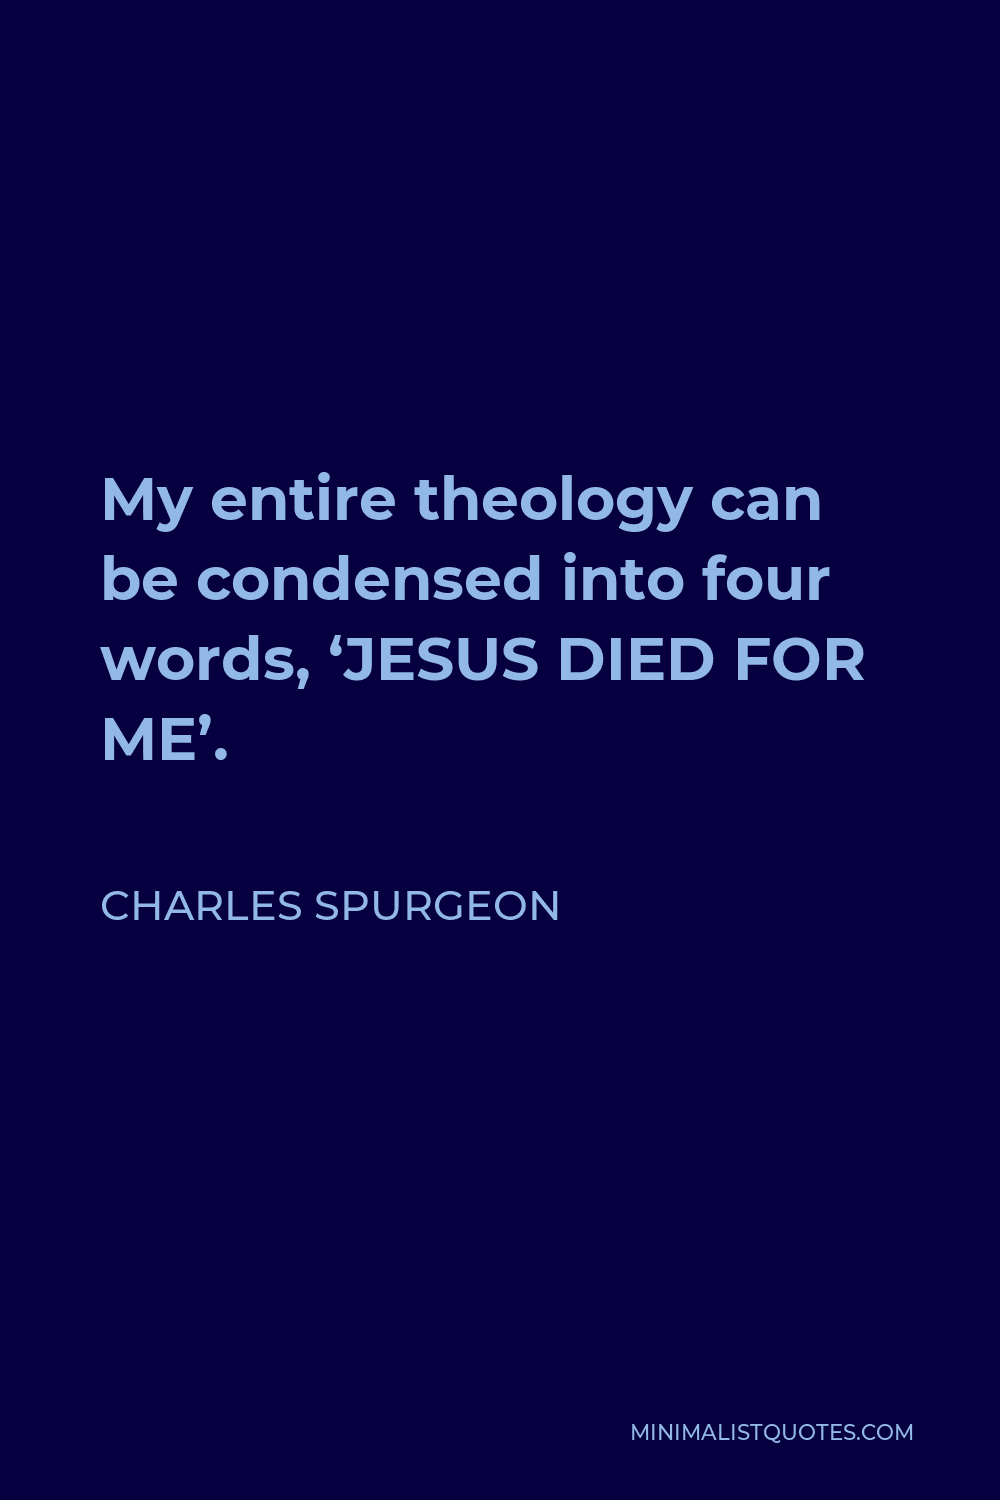 Charles Spurgeon Quote - My entire theology can be condensed into four words, ‘JESUS DIED FOR ME’.